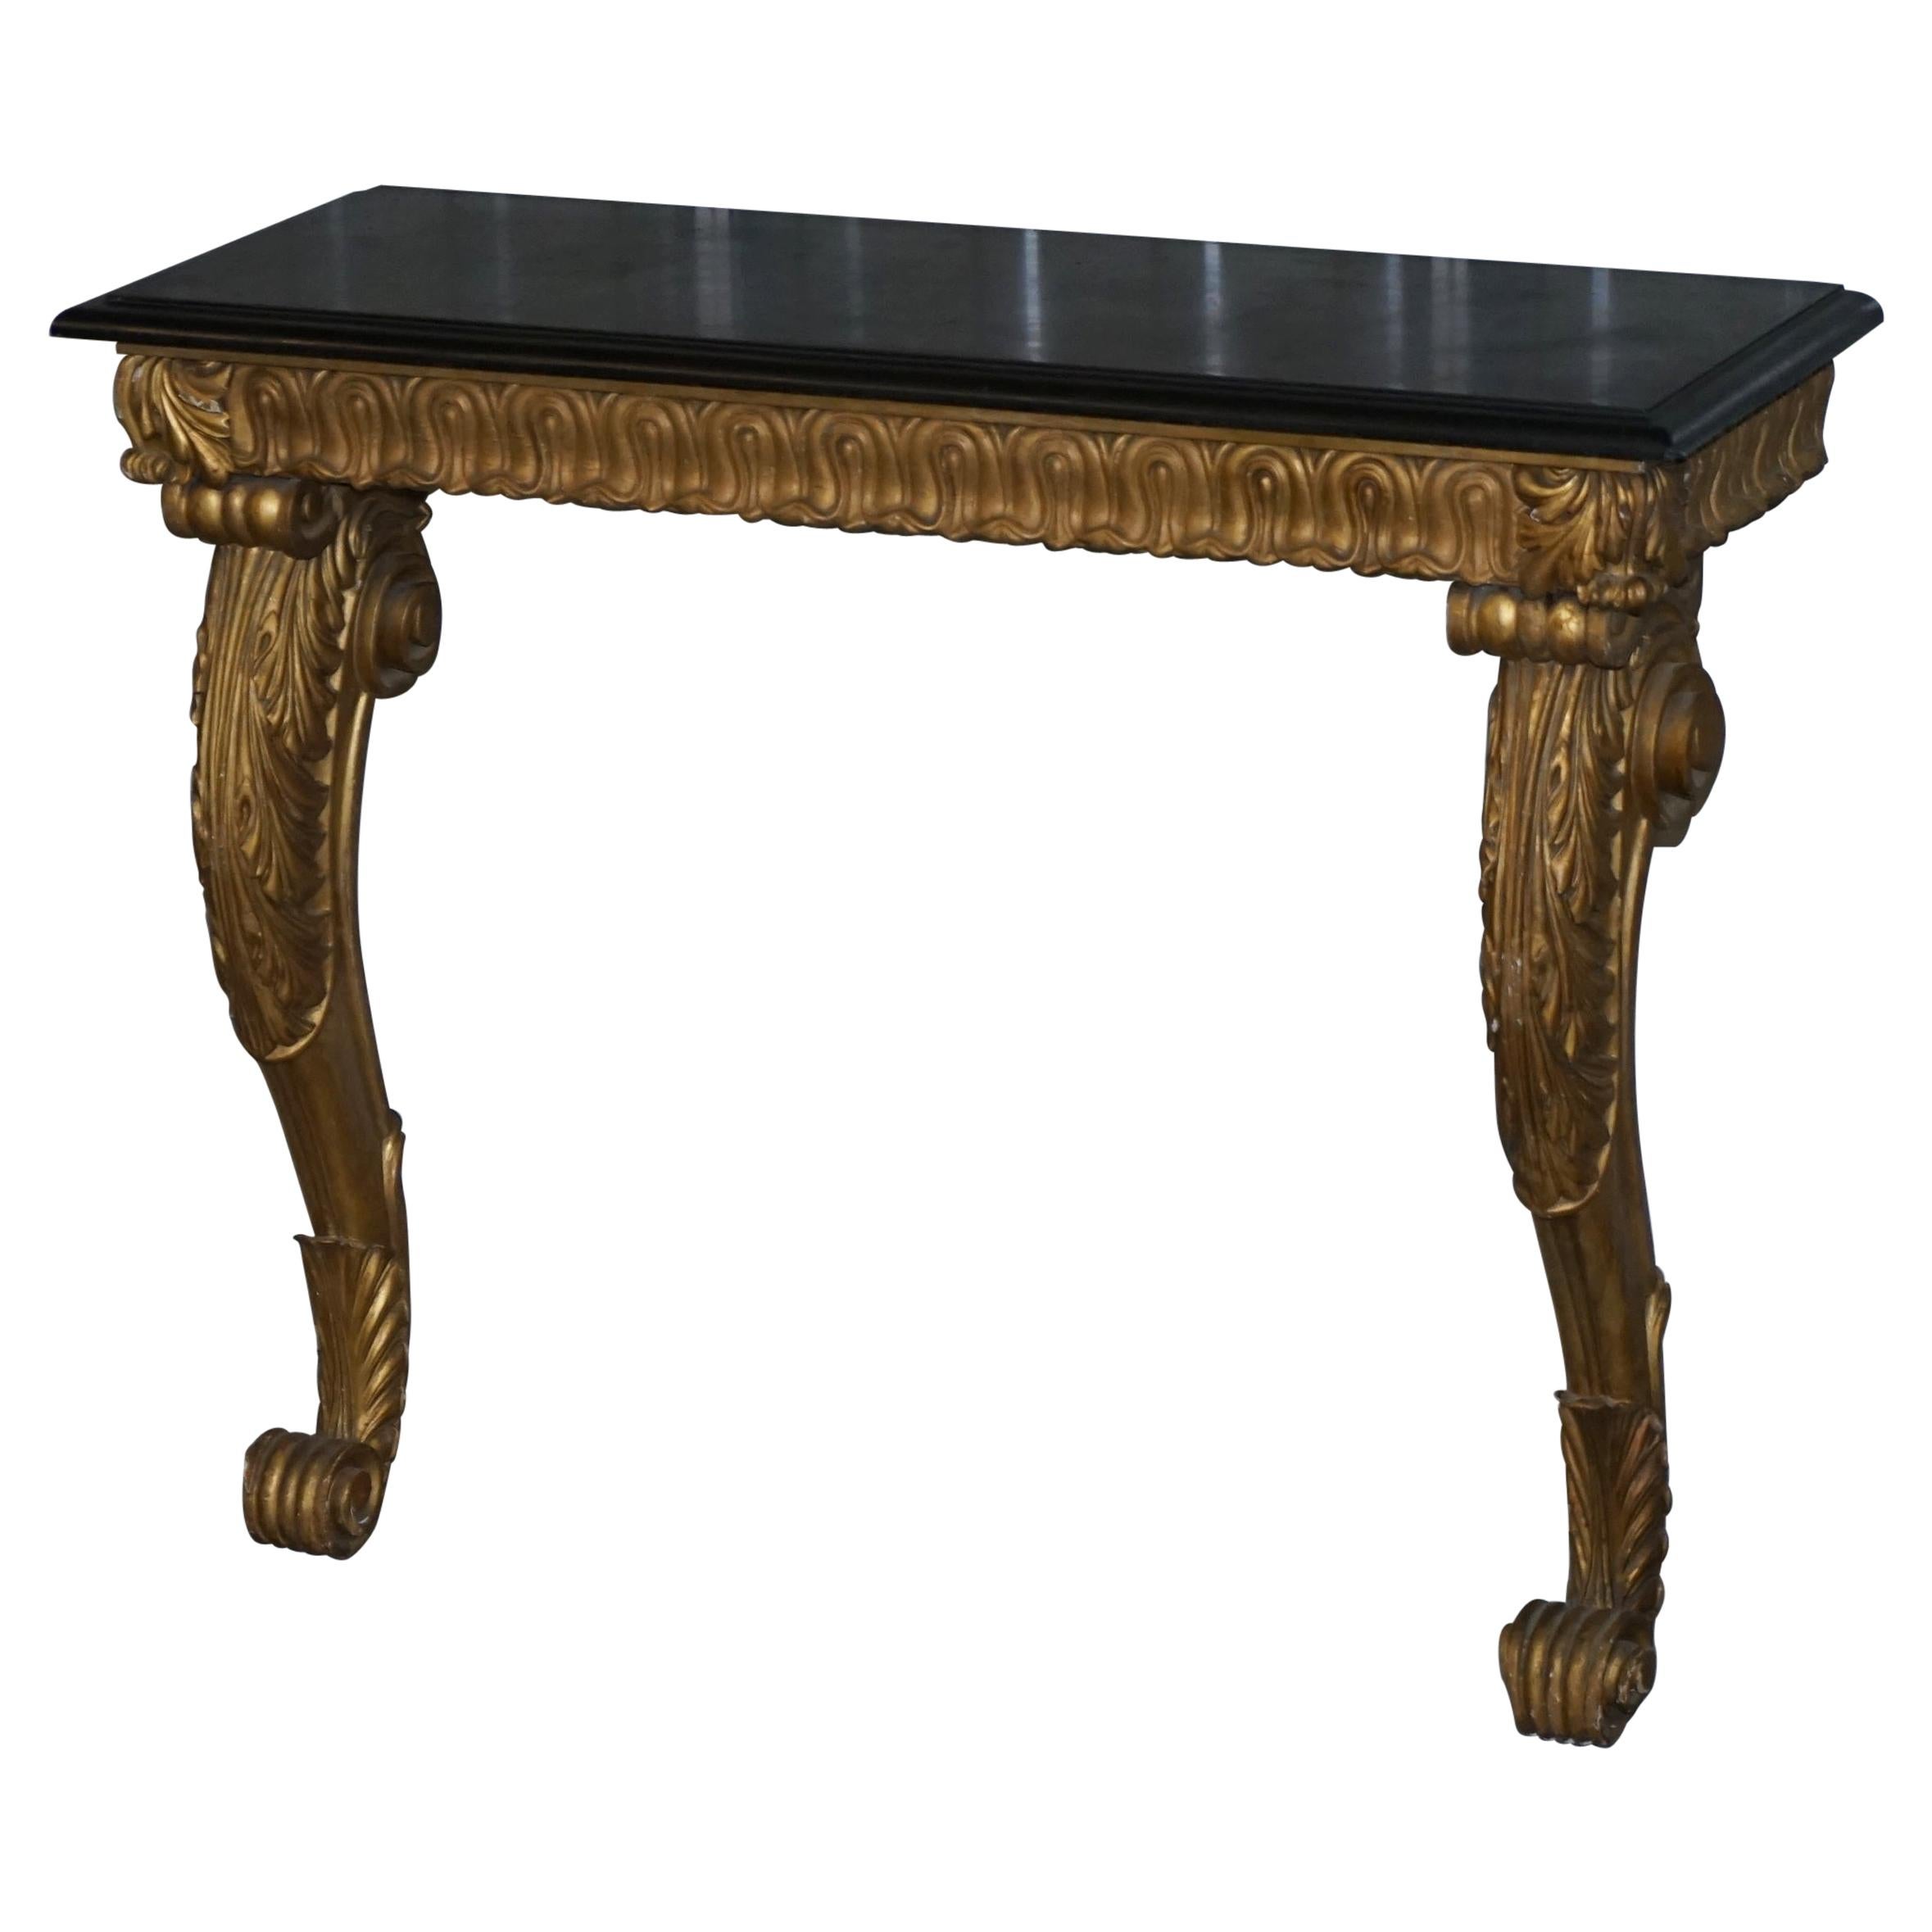 Rare Antique French Hand Carved Giltwood & Marble Console Table circa 1860 Paris For Sale